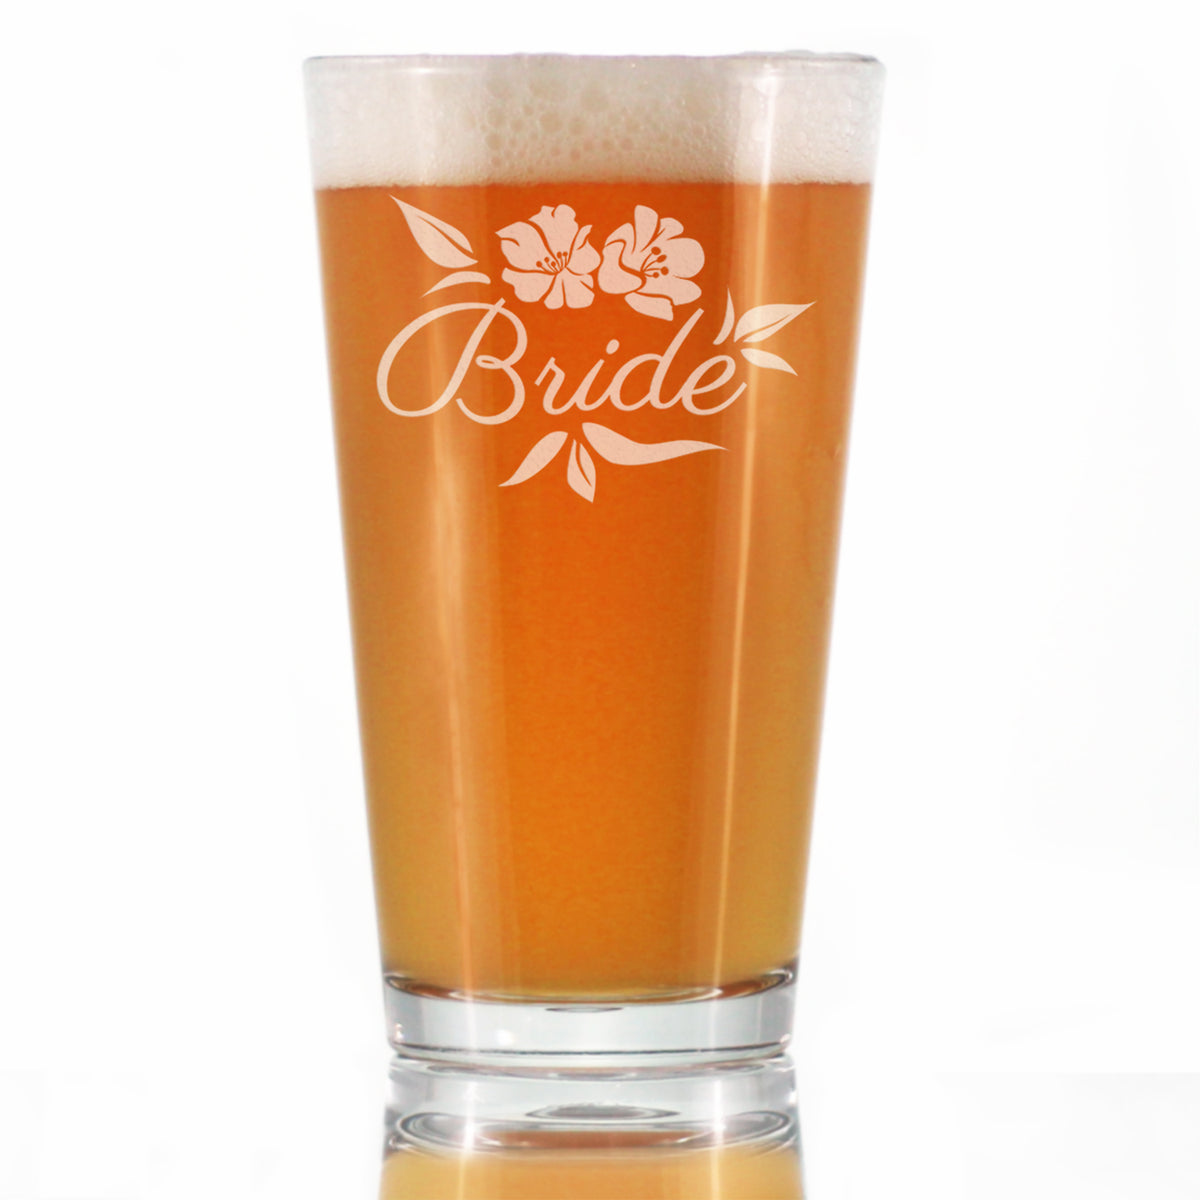 Bride Pint Glass - Unique Wedding Gift for Bride - Cute Engraved Wedding Cup Gift